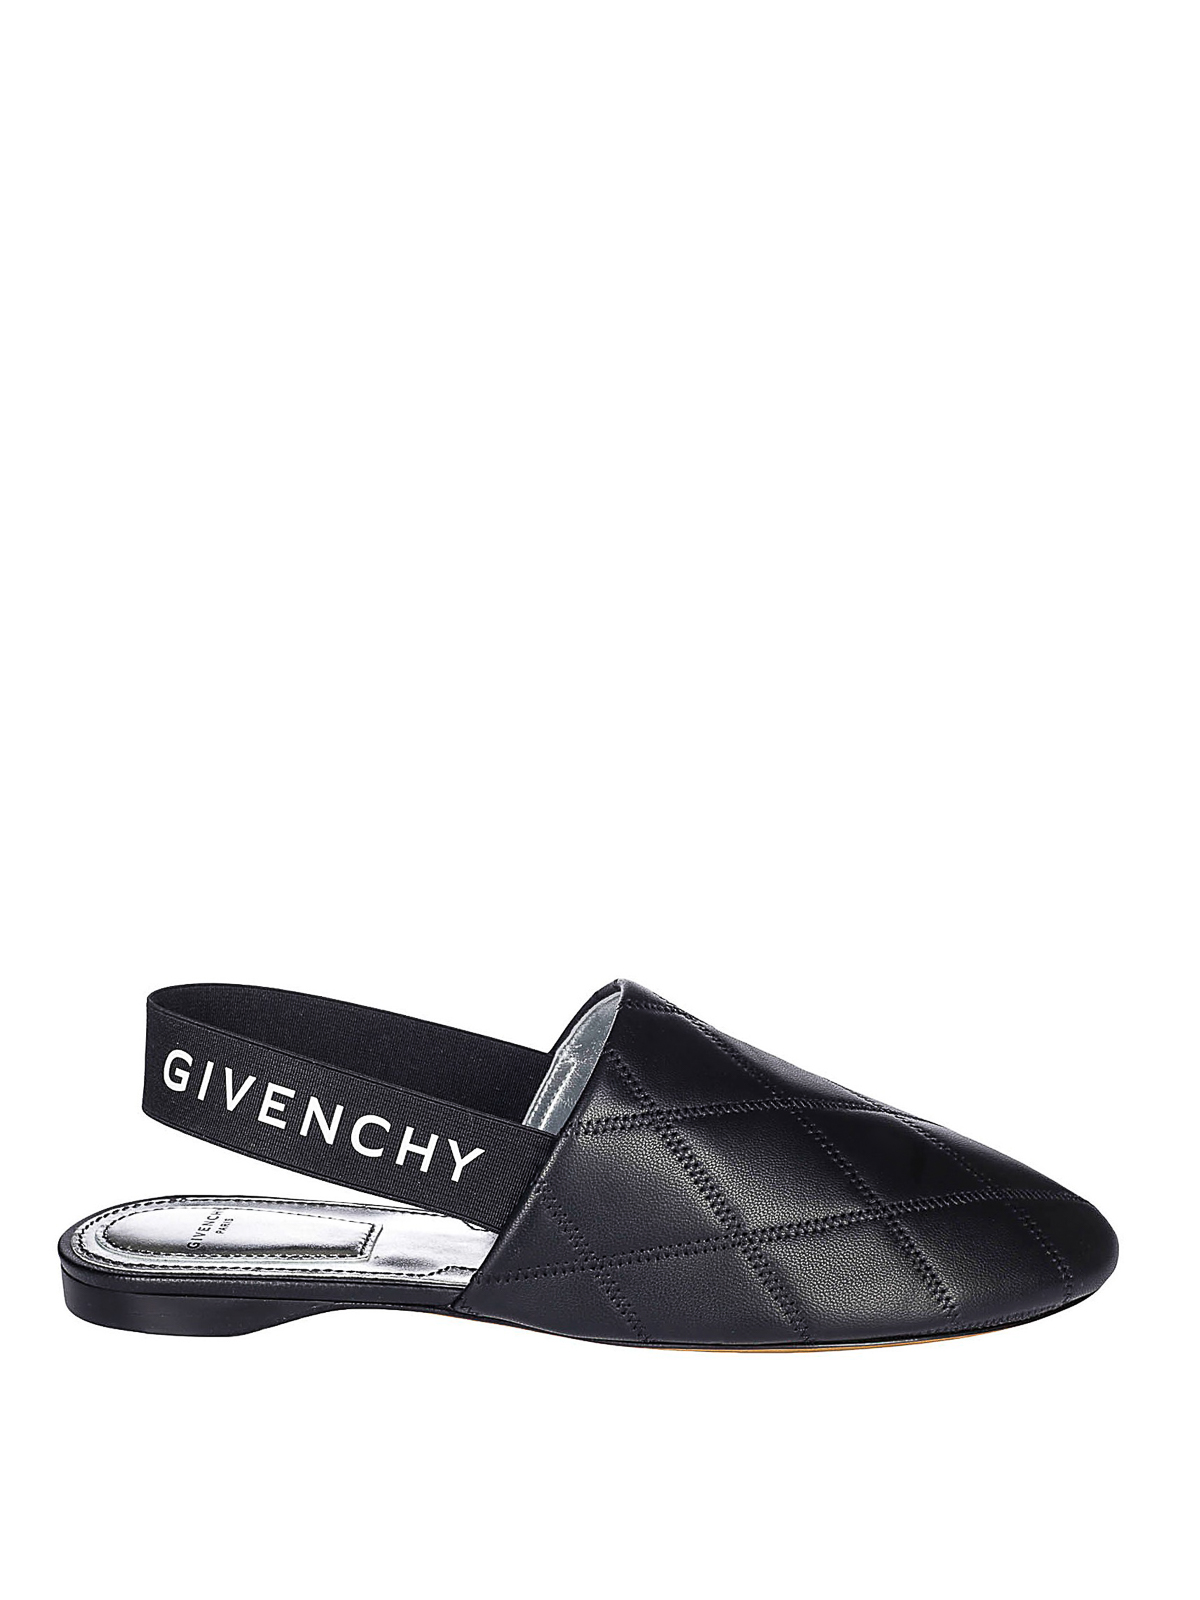 Mules shoes Givenchy - Black quilted leather mules - BE2003E0A6001